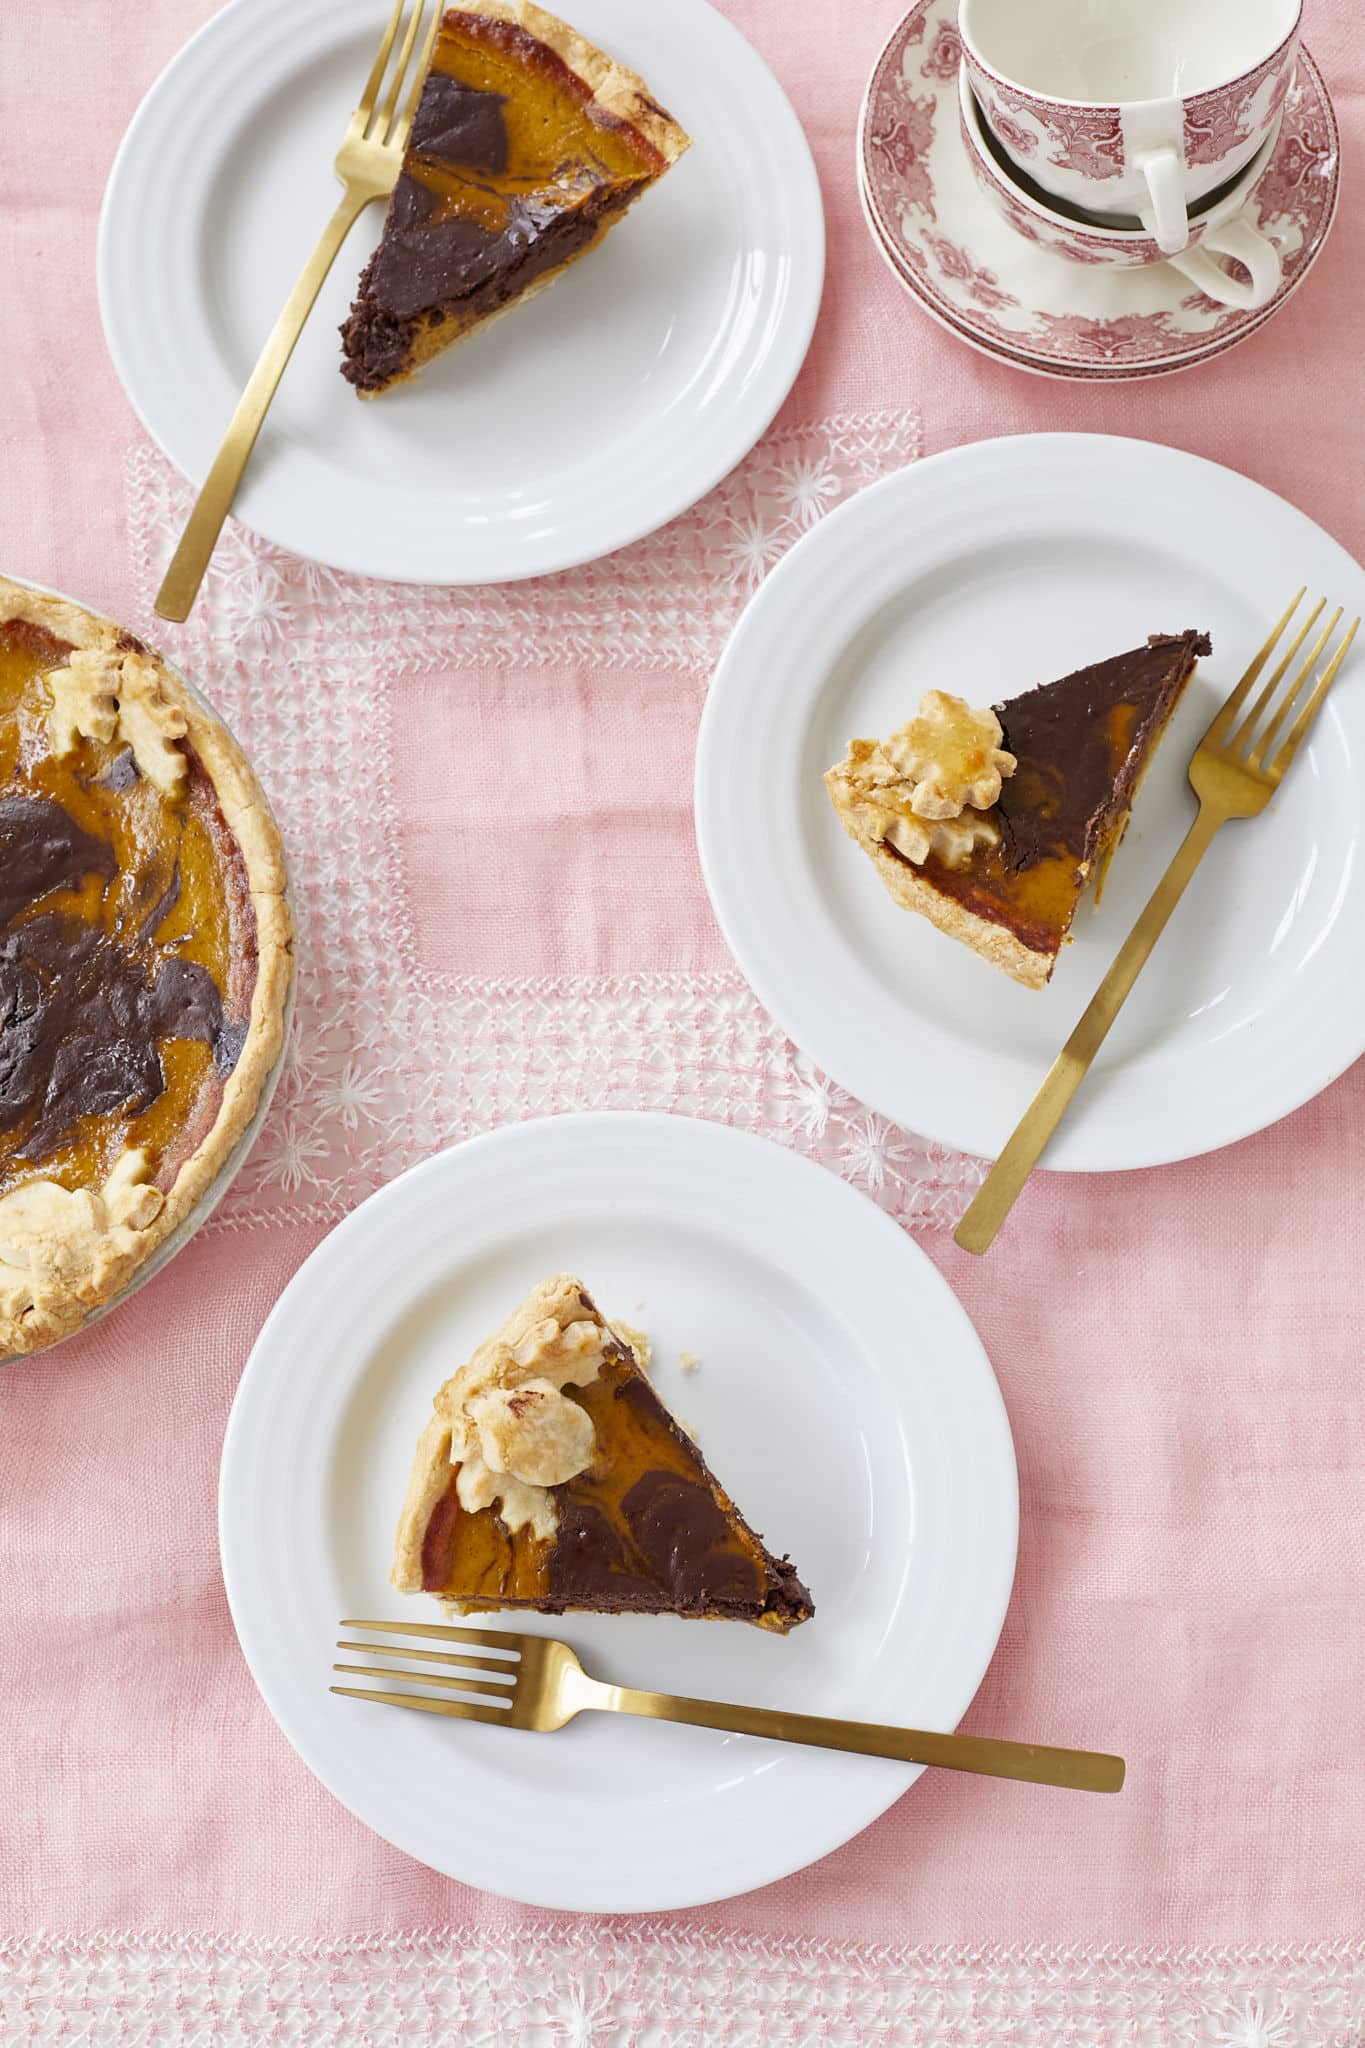 Three slices of Chocolate Swirl Pumpkin Pie are served on white plates with gold forks. The photo, taken from above, shows the decorative pie crust and the marbled pie filling.